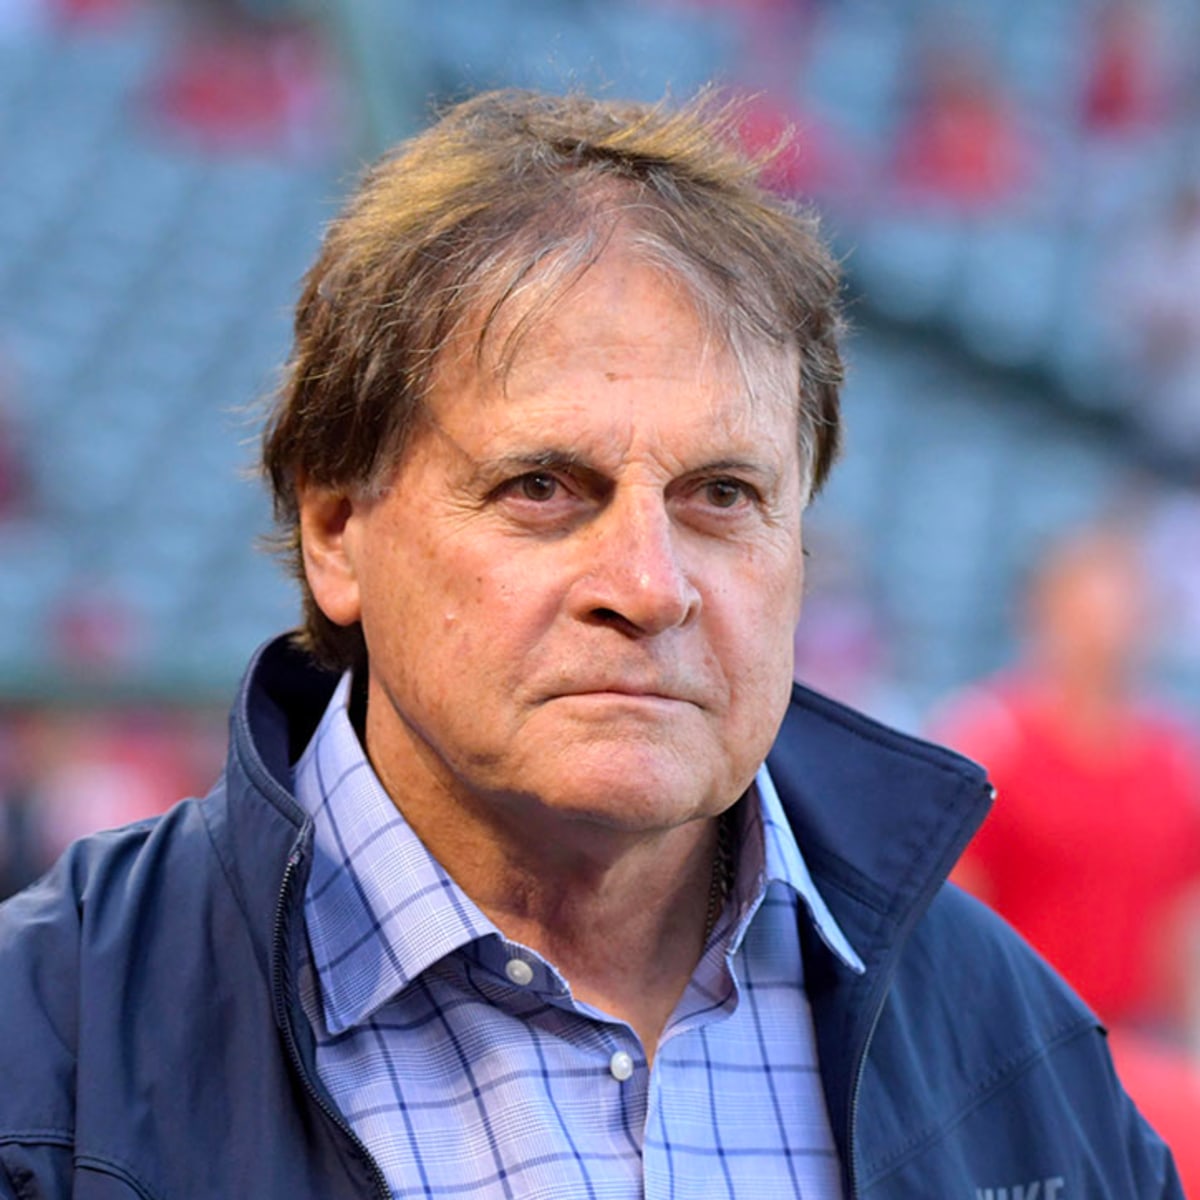 Why Cardinals hired Tony La Russa as manager